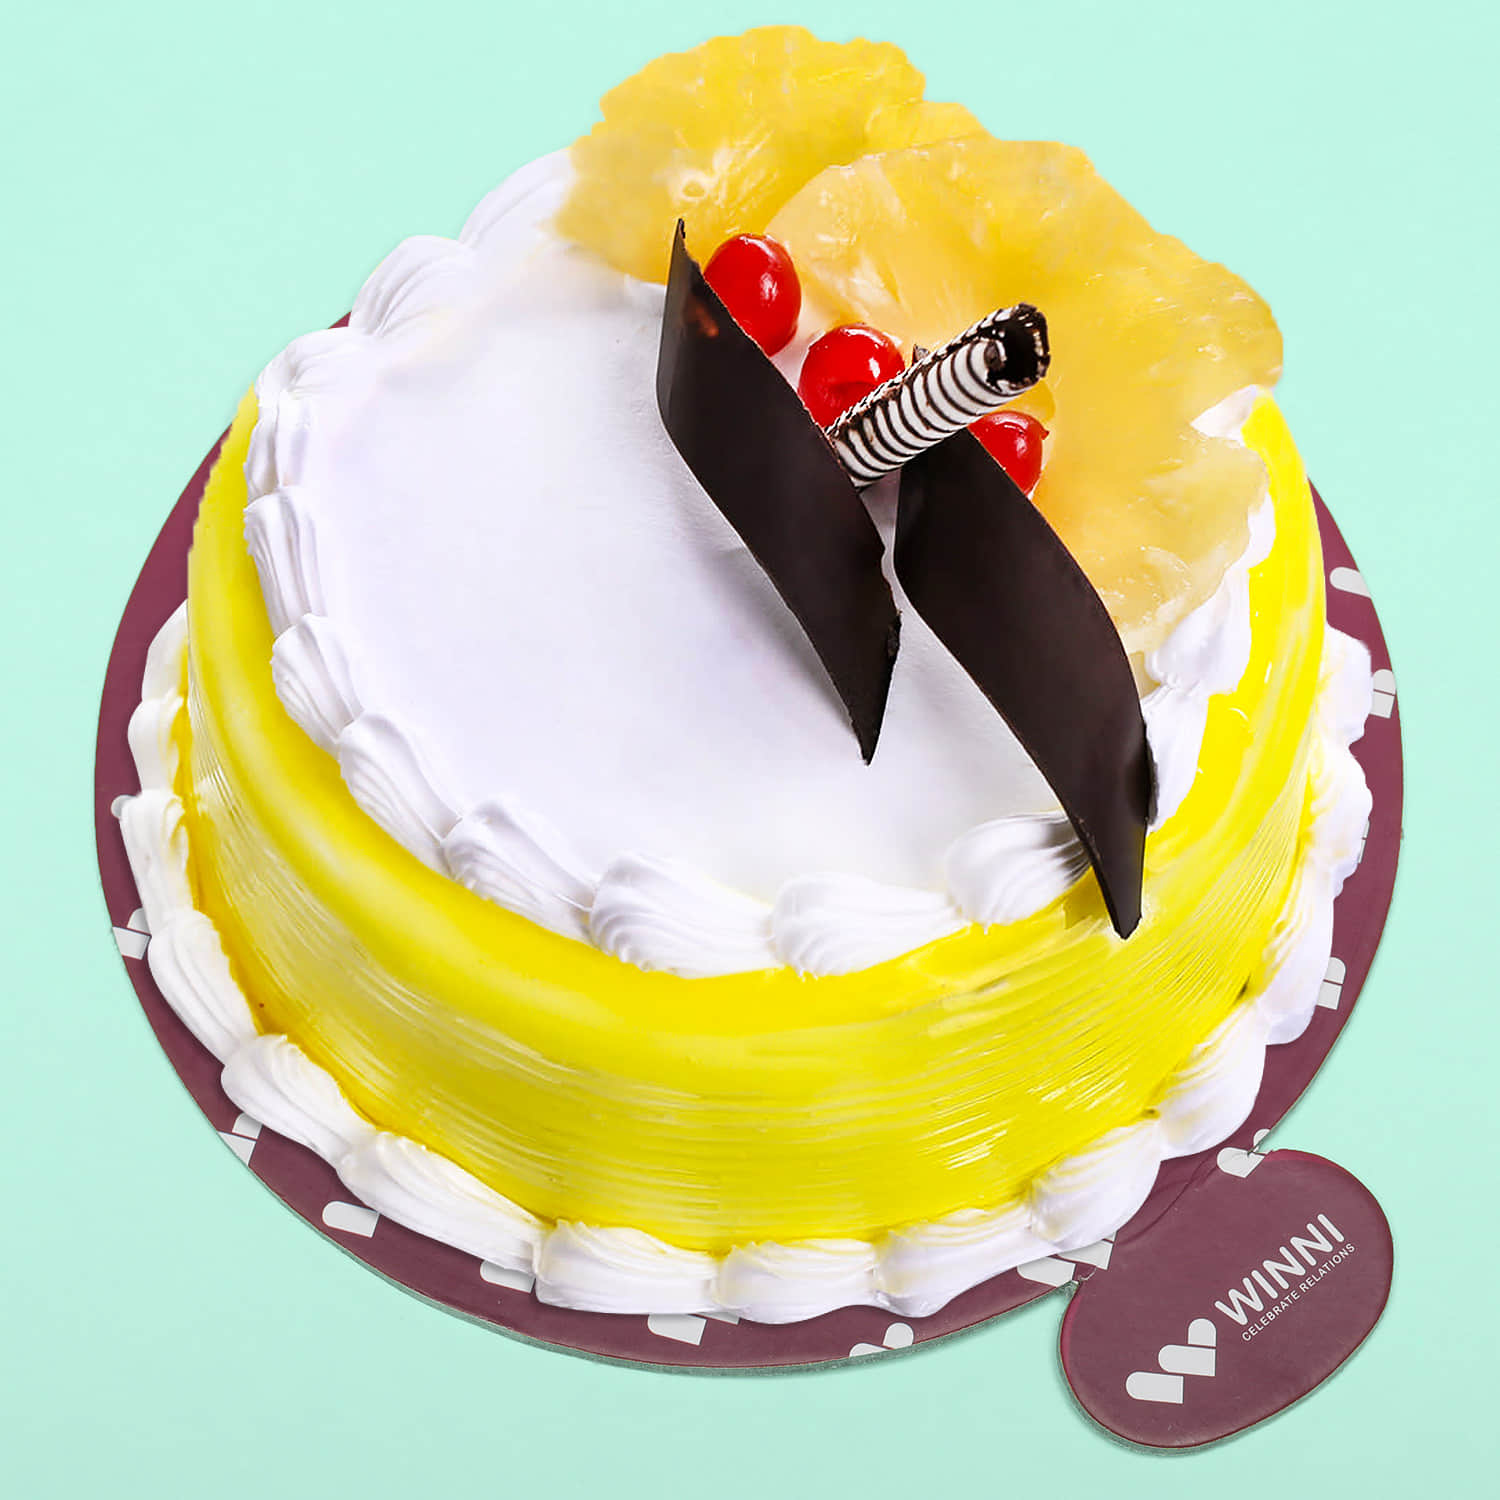 Winni Cakes and More Lucknow | Lucknow